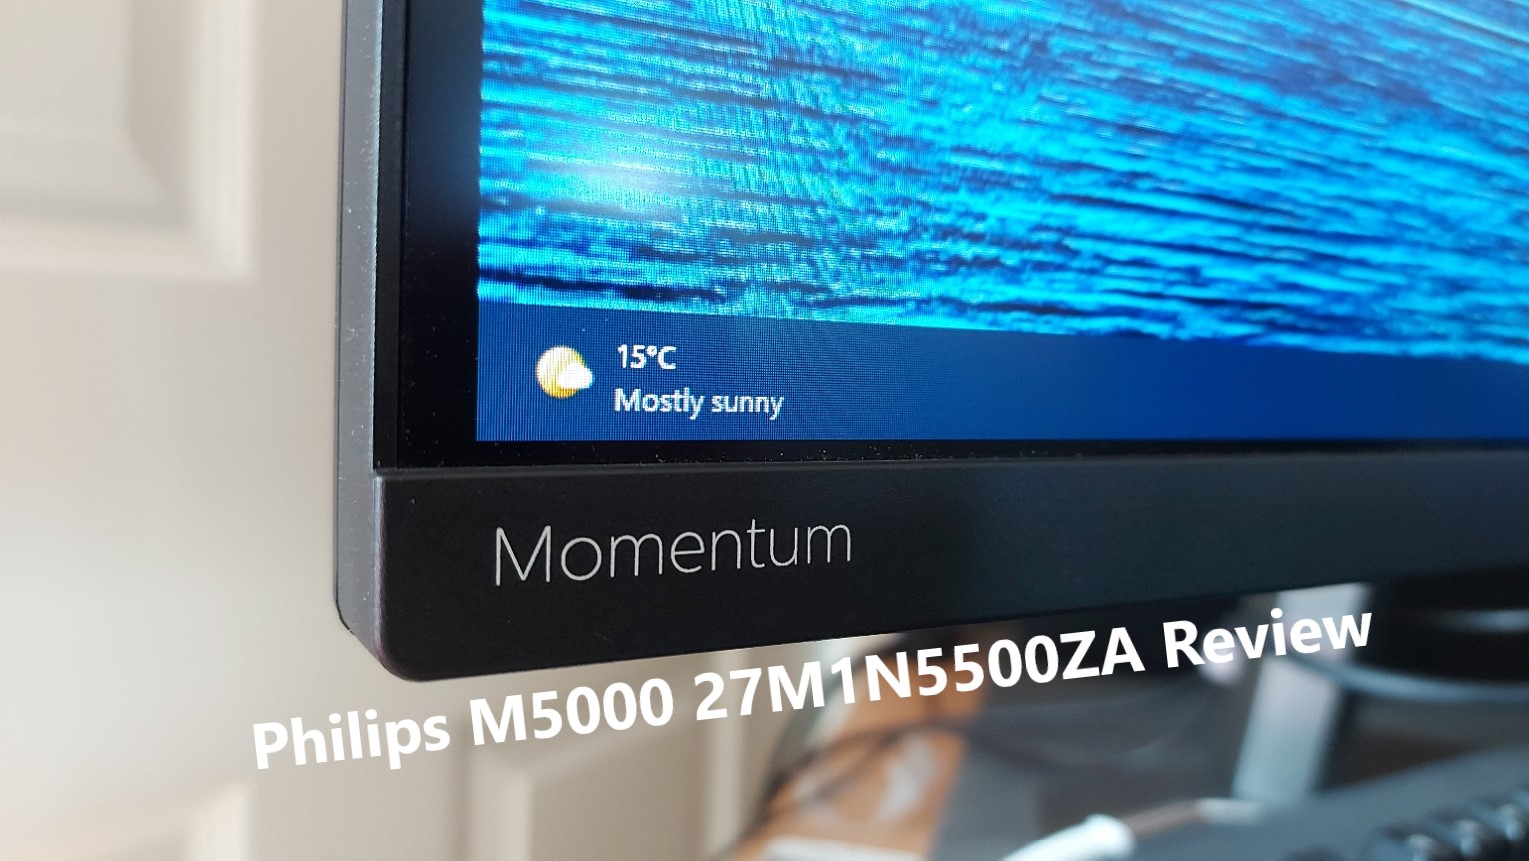 Philips Momentum 5000 27M1N5500ZA Review Addicts Gaming - Total